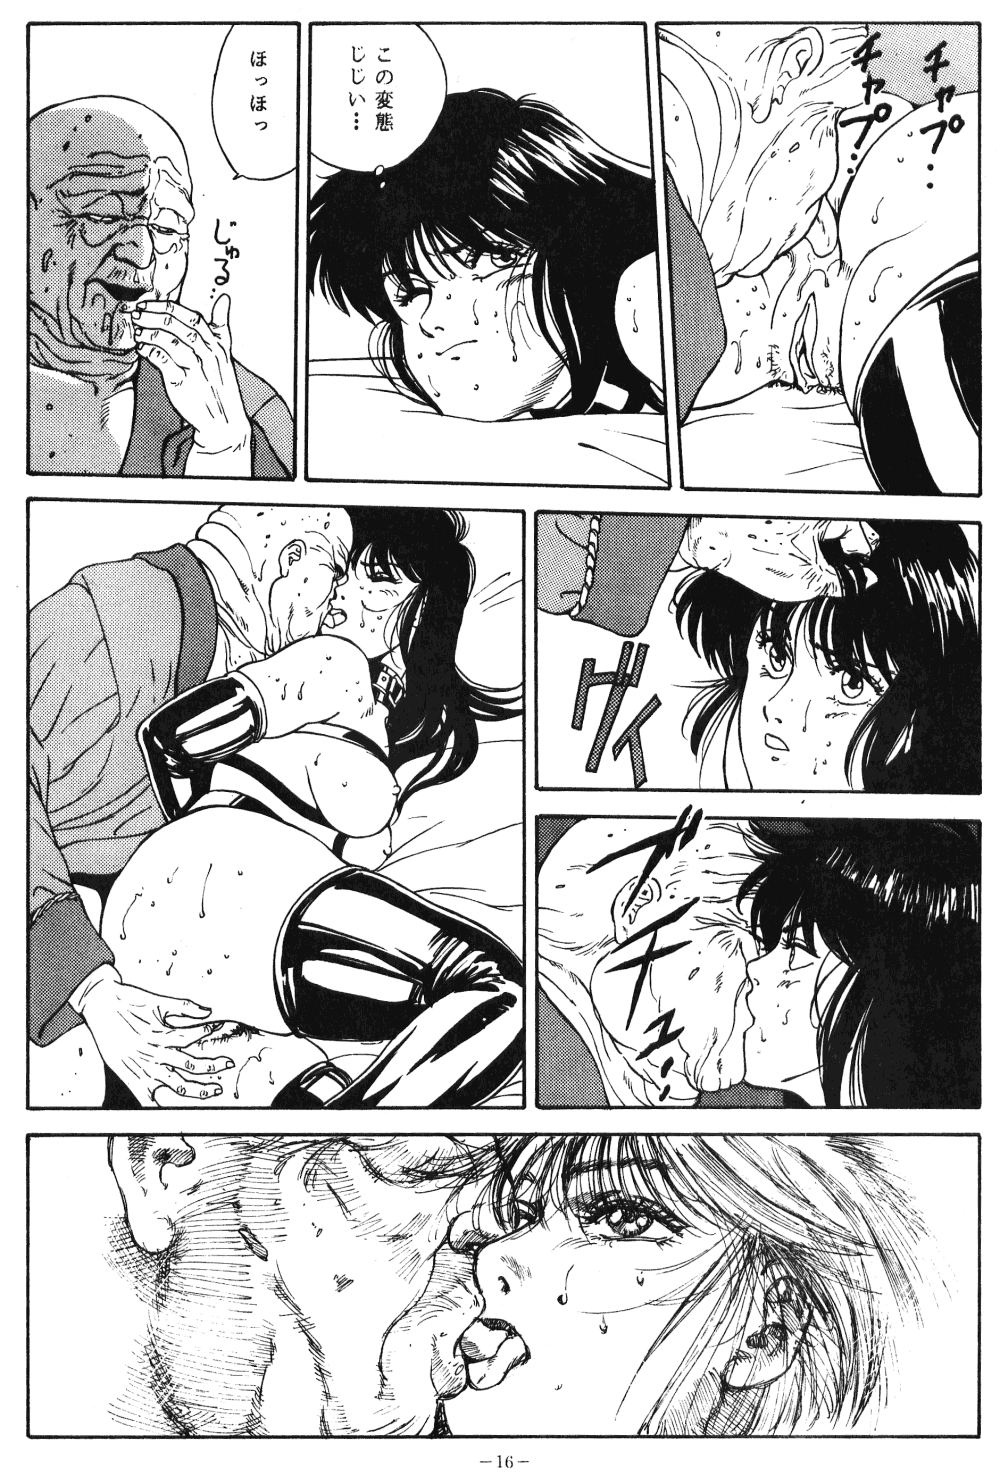 [ALPS (Various)] LOOK OUT 21 (Various) page 15 full